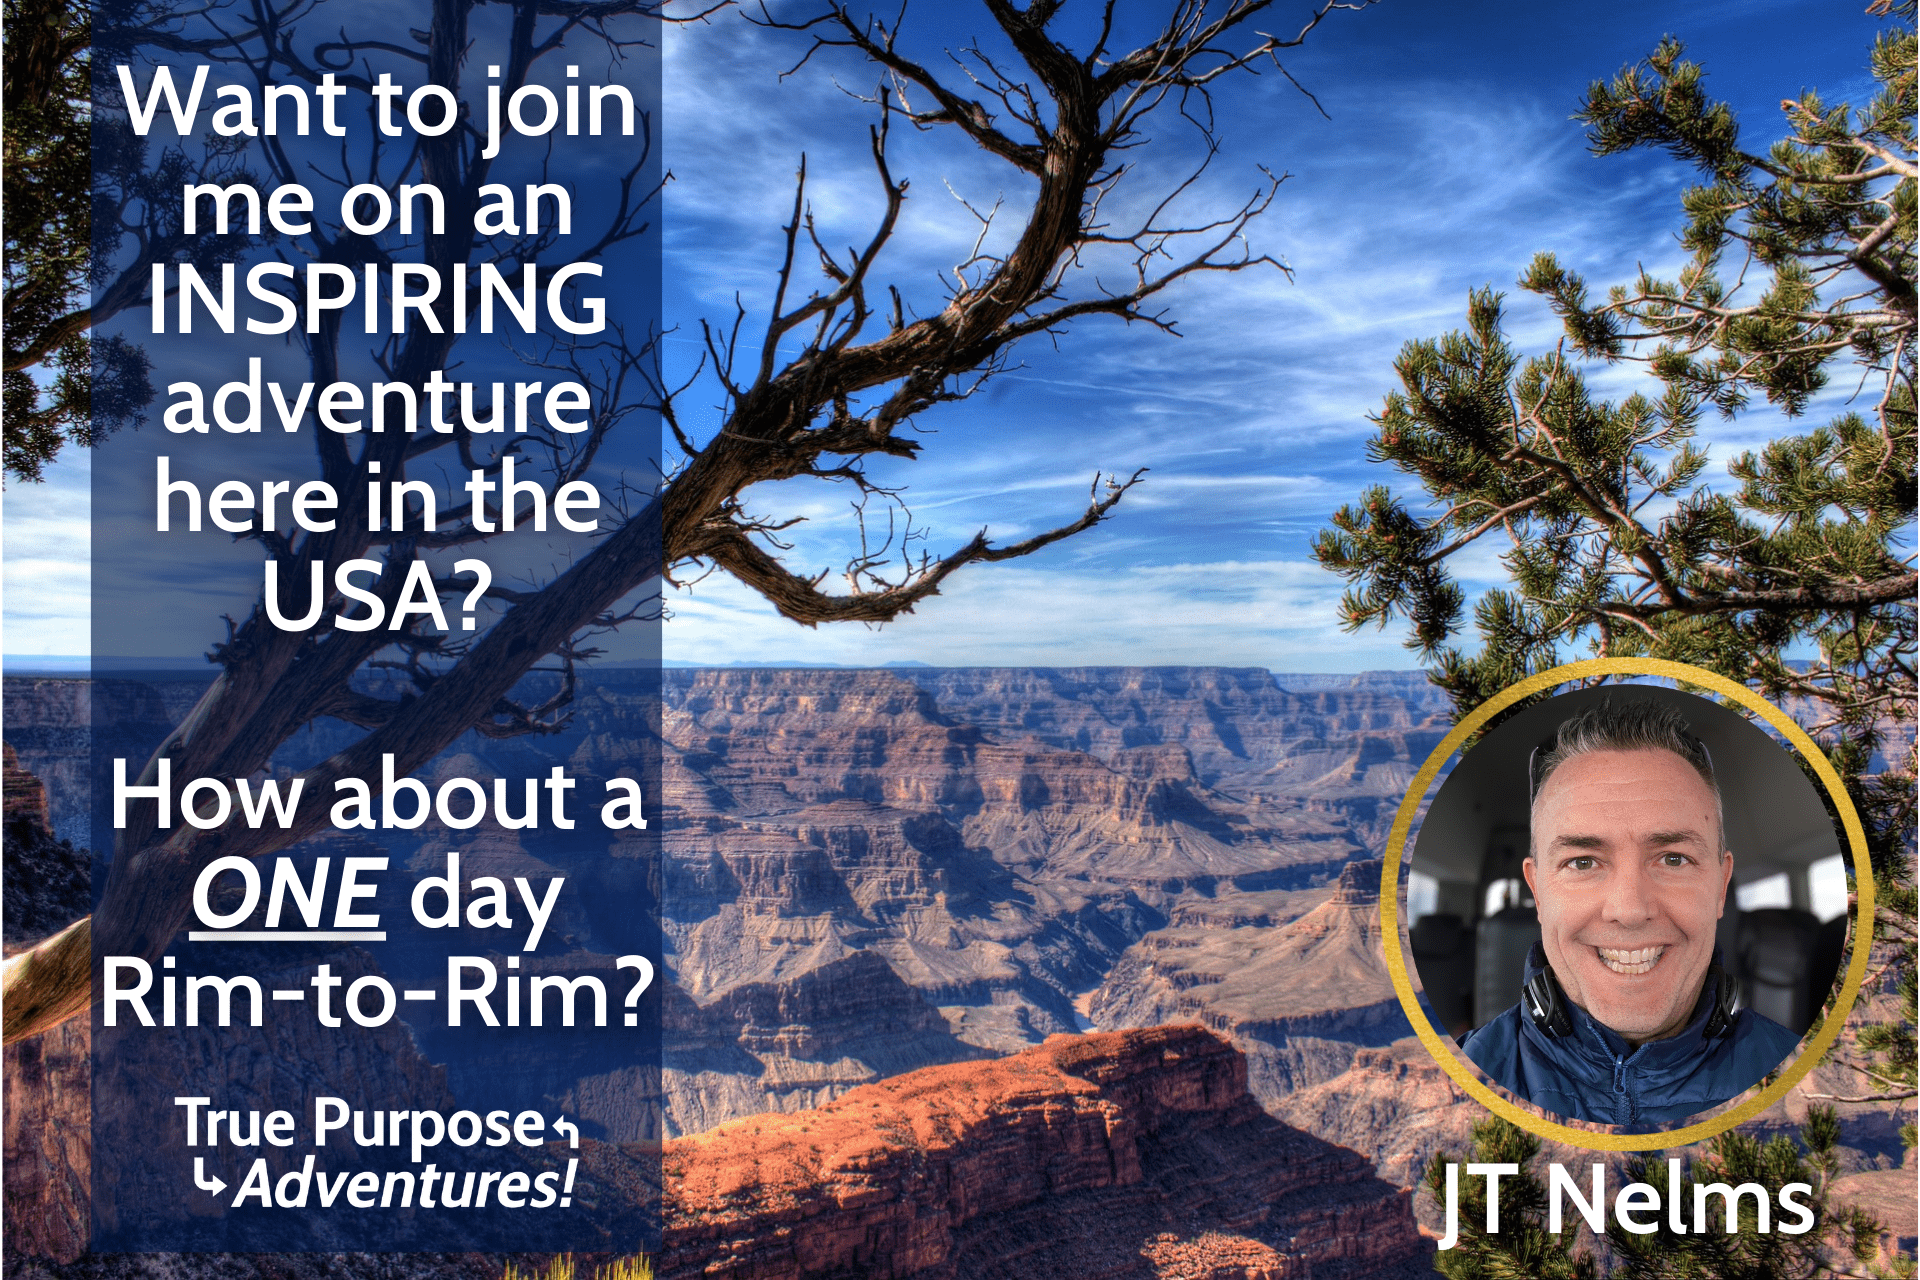 Join JT for Grand Canyon Rim to Rim